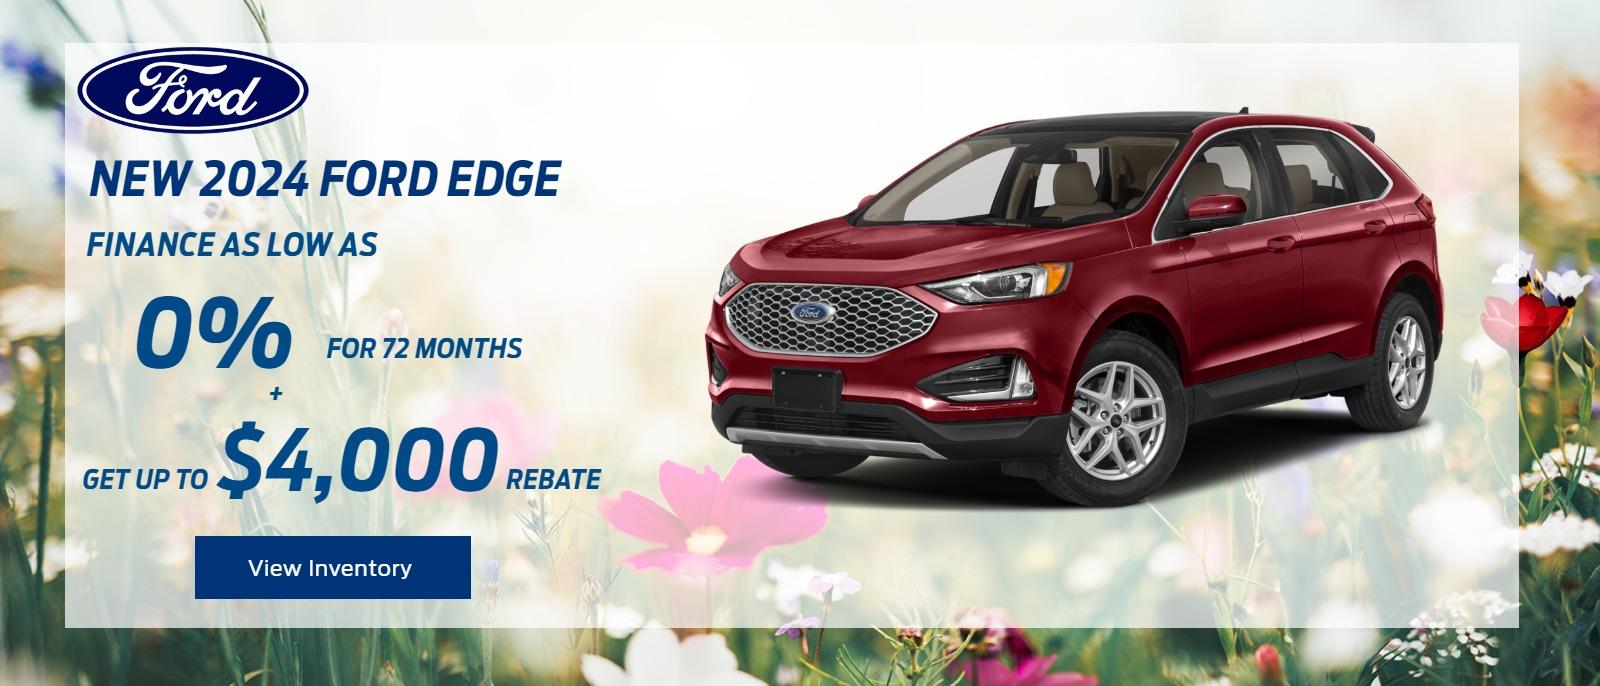 New 2024 Ford Edge
 Finance as low as 1.9% for 36 months + Get Up to $4,000 in Lease Renewal